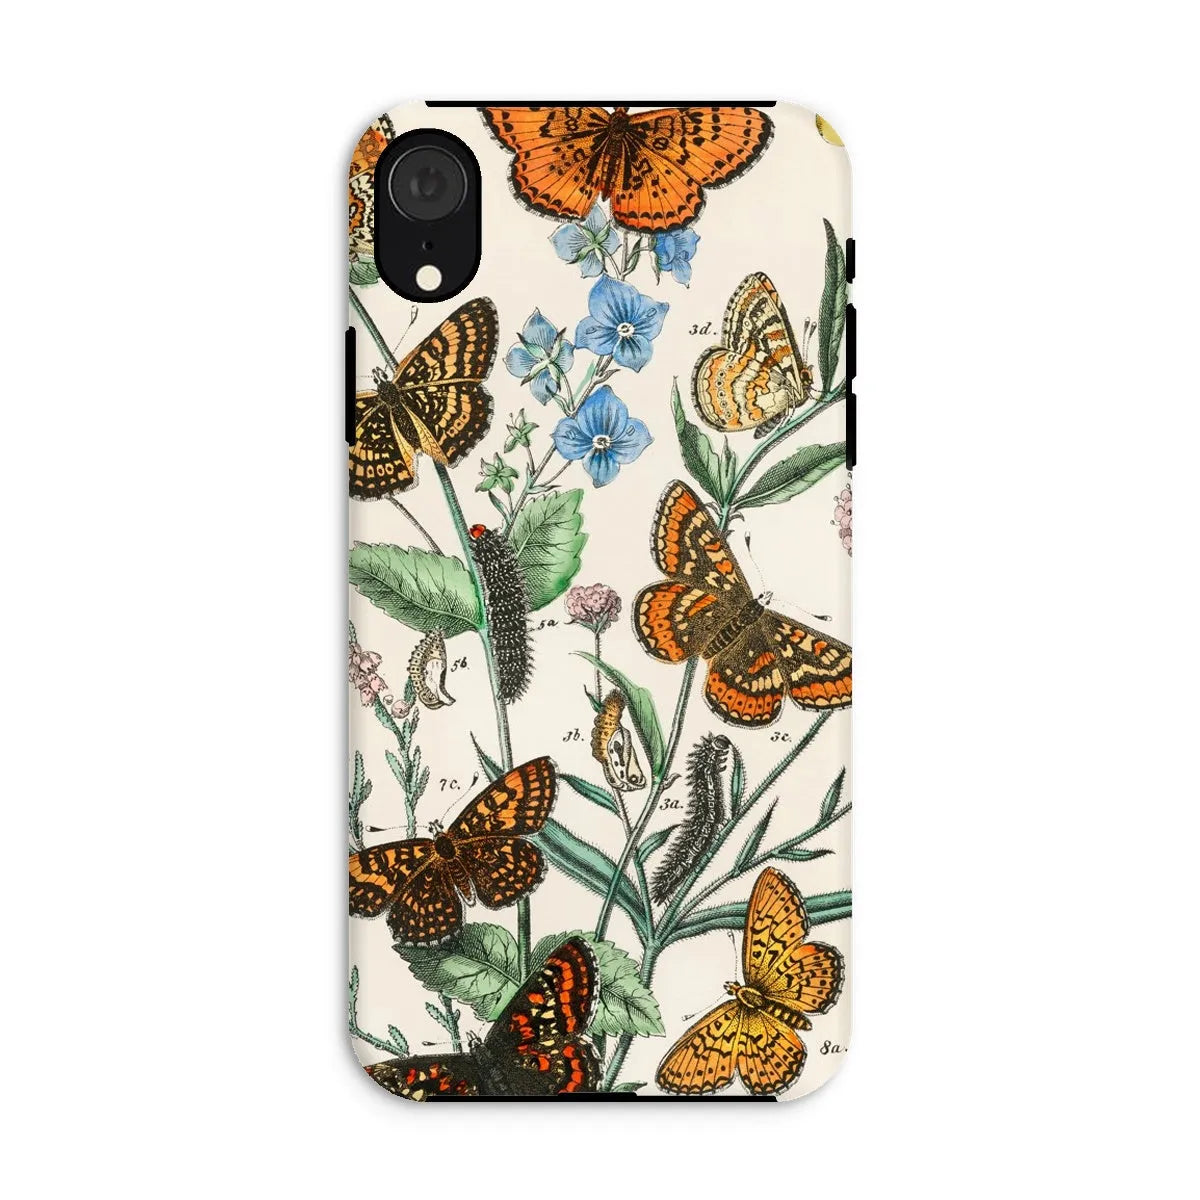 This Butterfly Aesthetic Art Phone Case - William Forsell Kirby - Iphone Xr / Matte - Mobile Phone Cases - Aesthetic Art